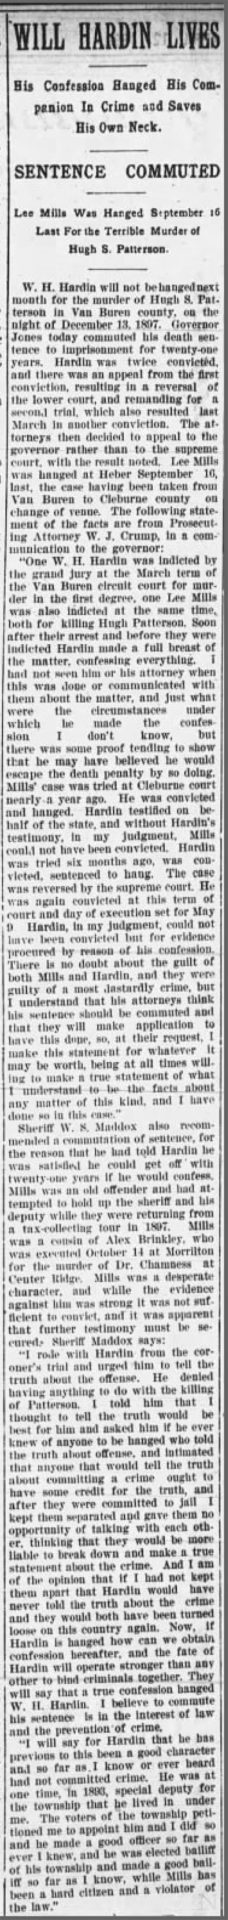 "Will Hardin Lives" newspaper clipping